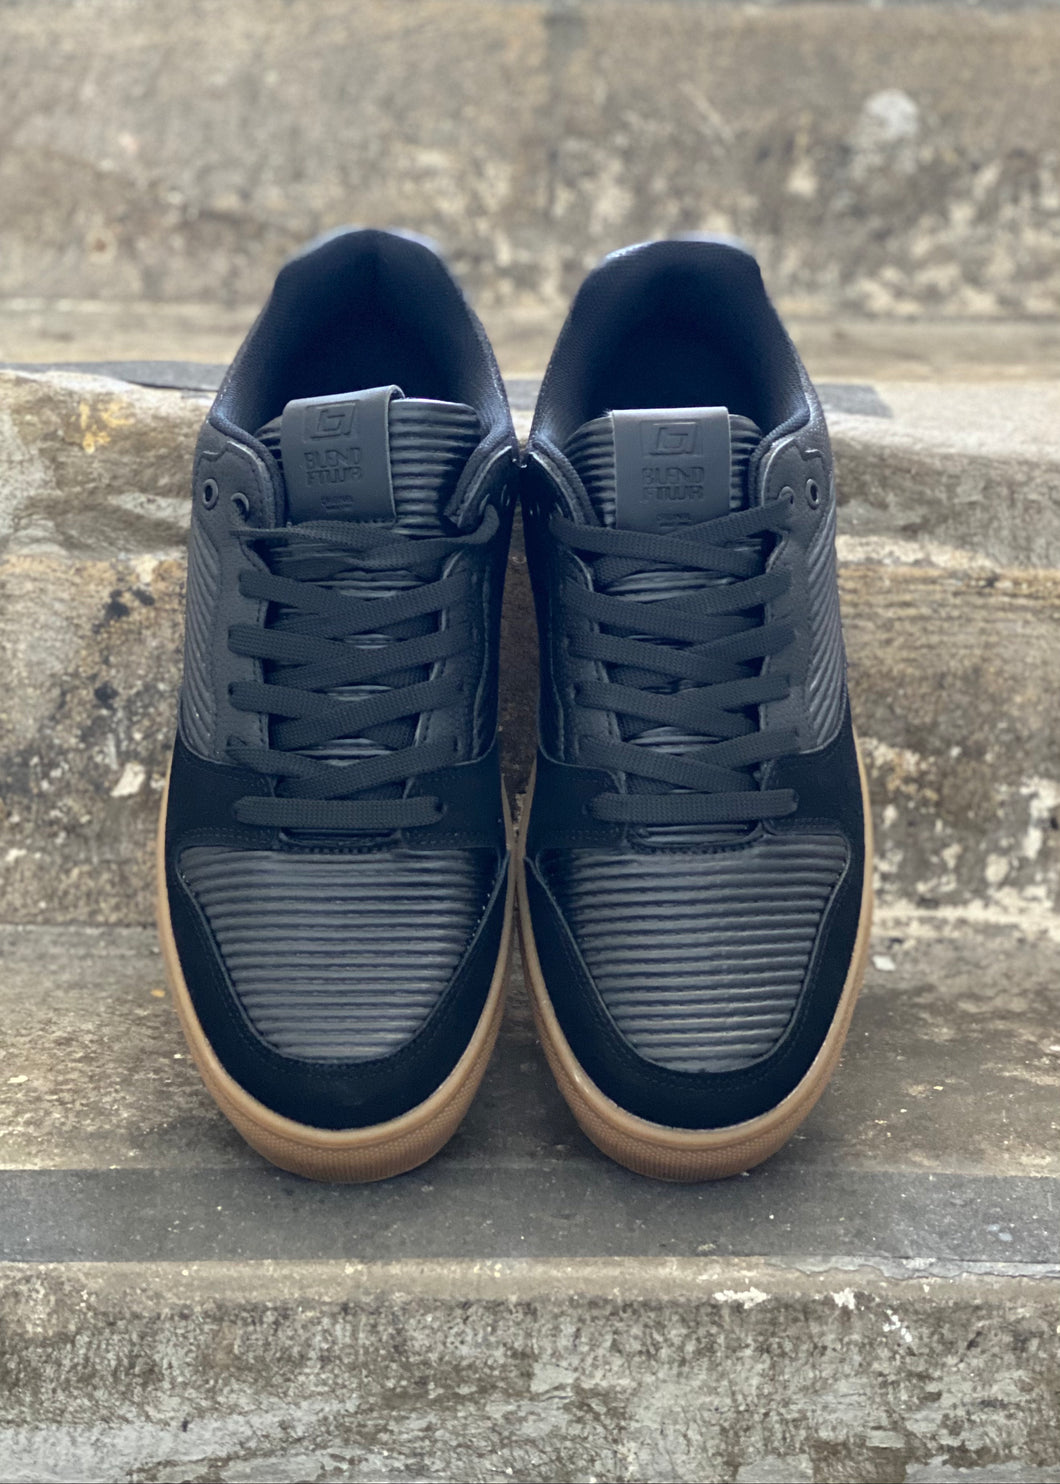 Casual Black trainers with brown sole. Comfortable footwear to wear with jeans, chinos or shorts in any season.